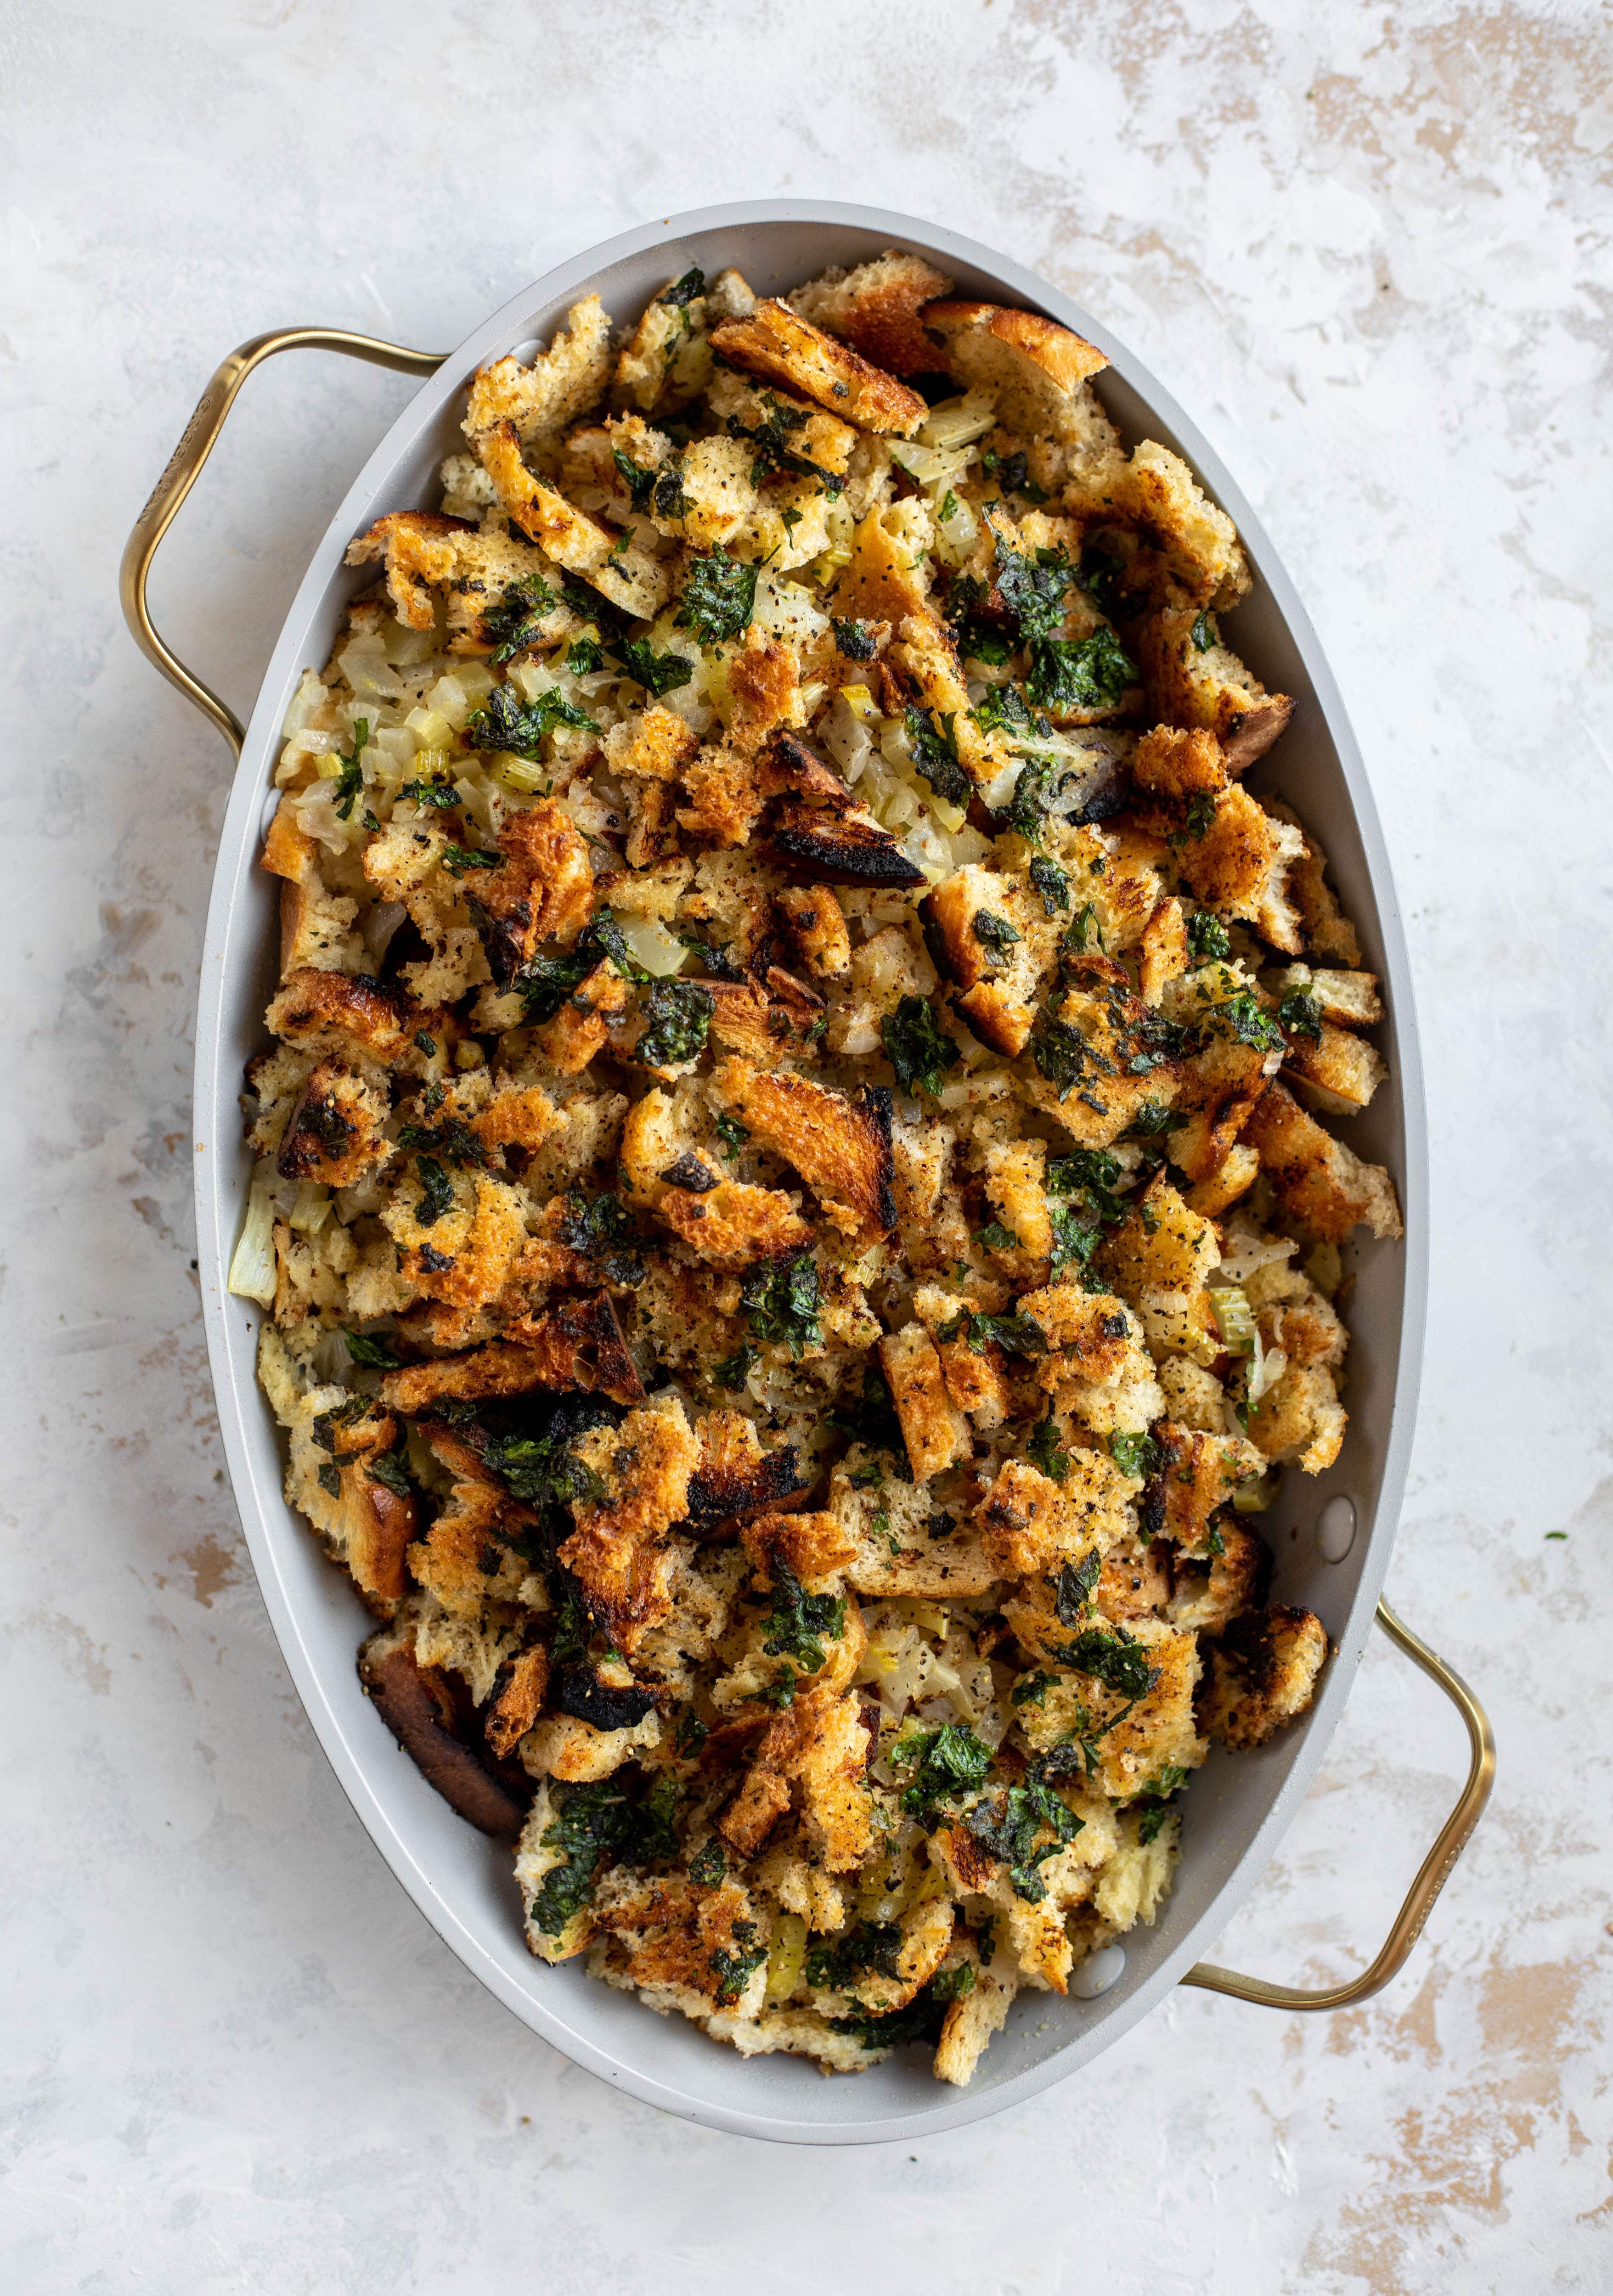 This grilled bread stuffing is a modern twist on the classic - deliciously traditional and flavored to perfection, made with grilled bread!